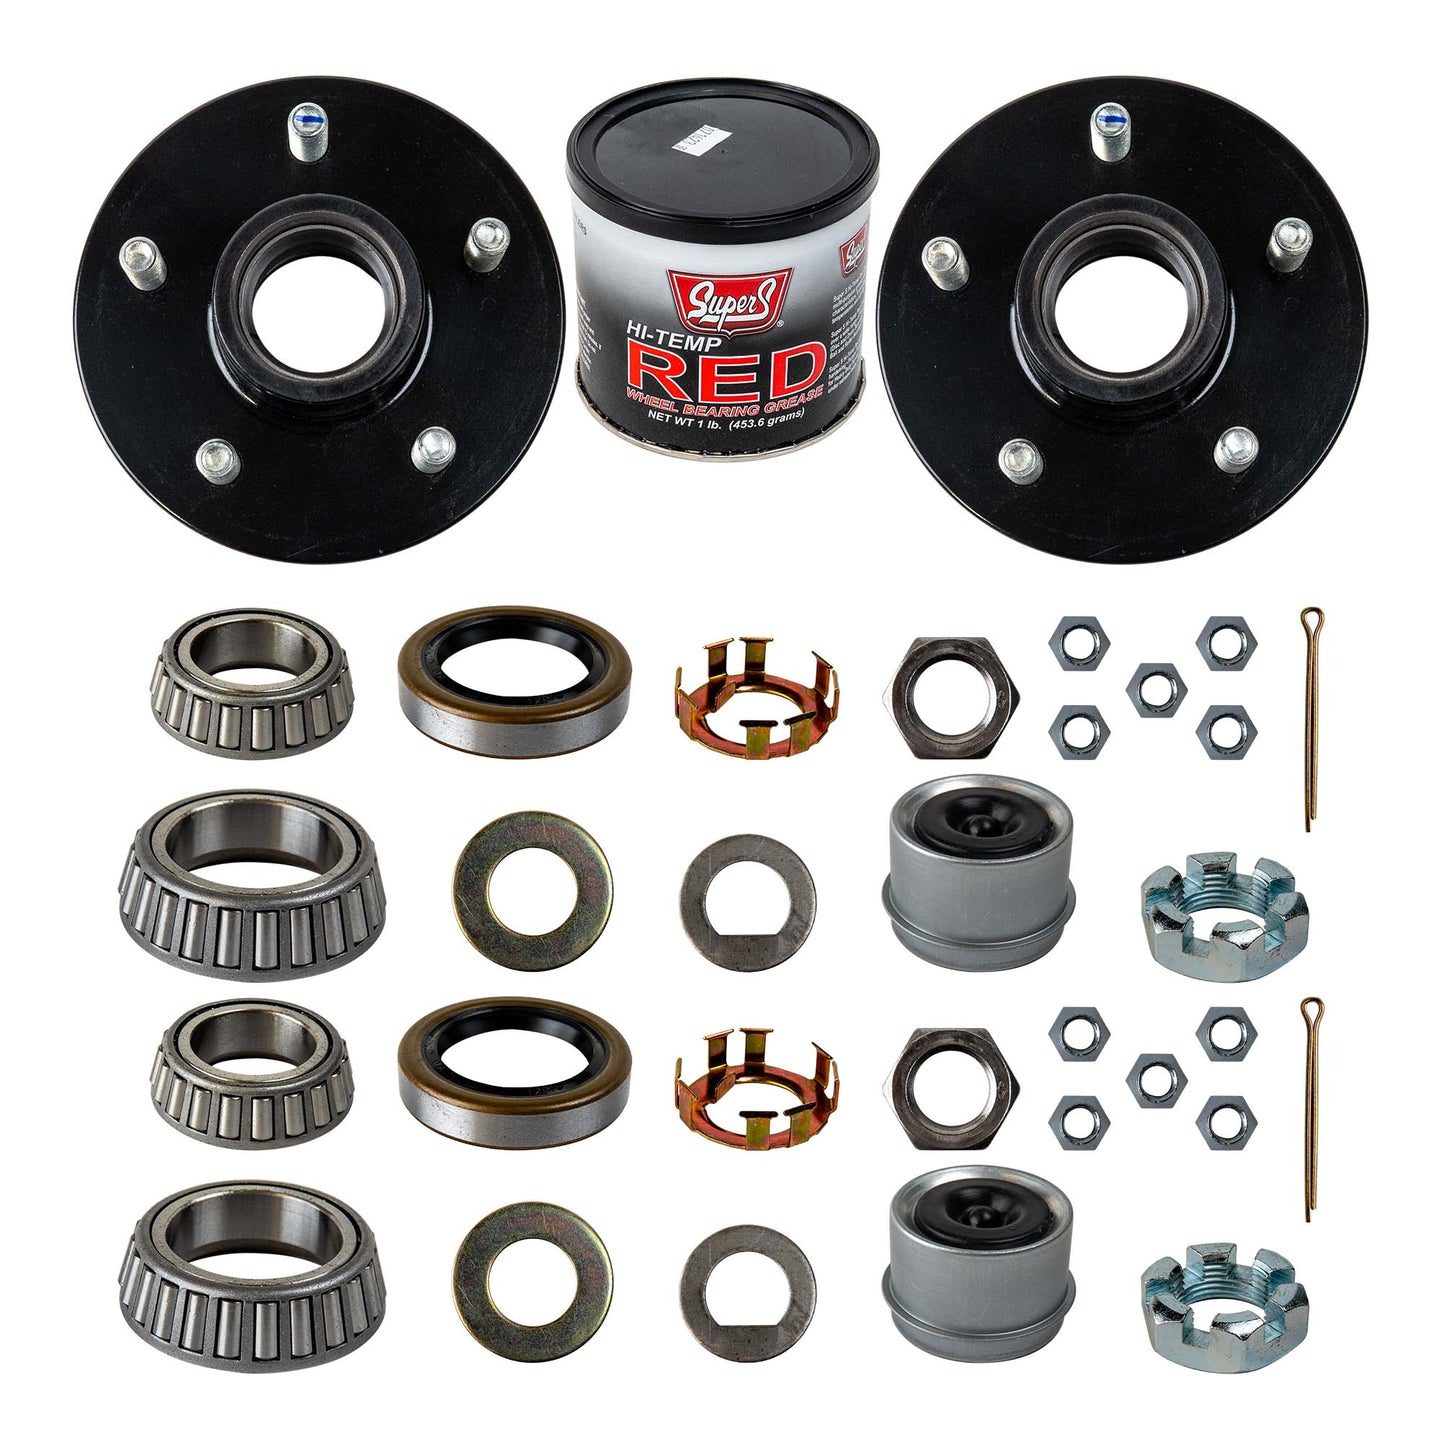 3500 lb Trailer Idler Axle TK Service Kit - 3.5k Capacity - The Trailer Parts Outlet